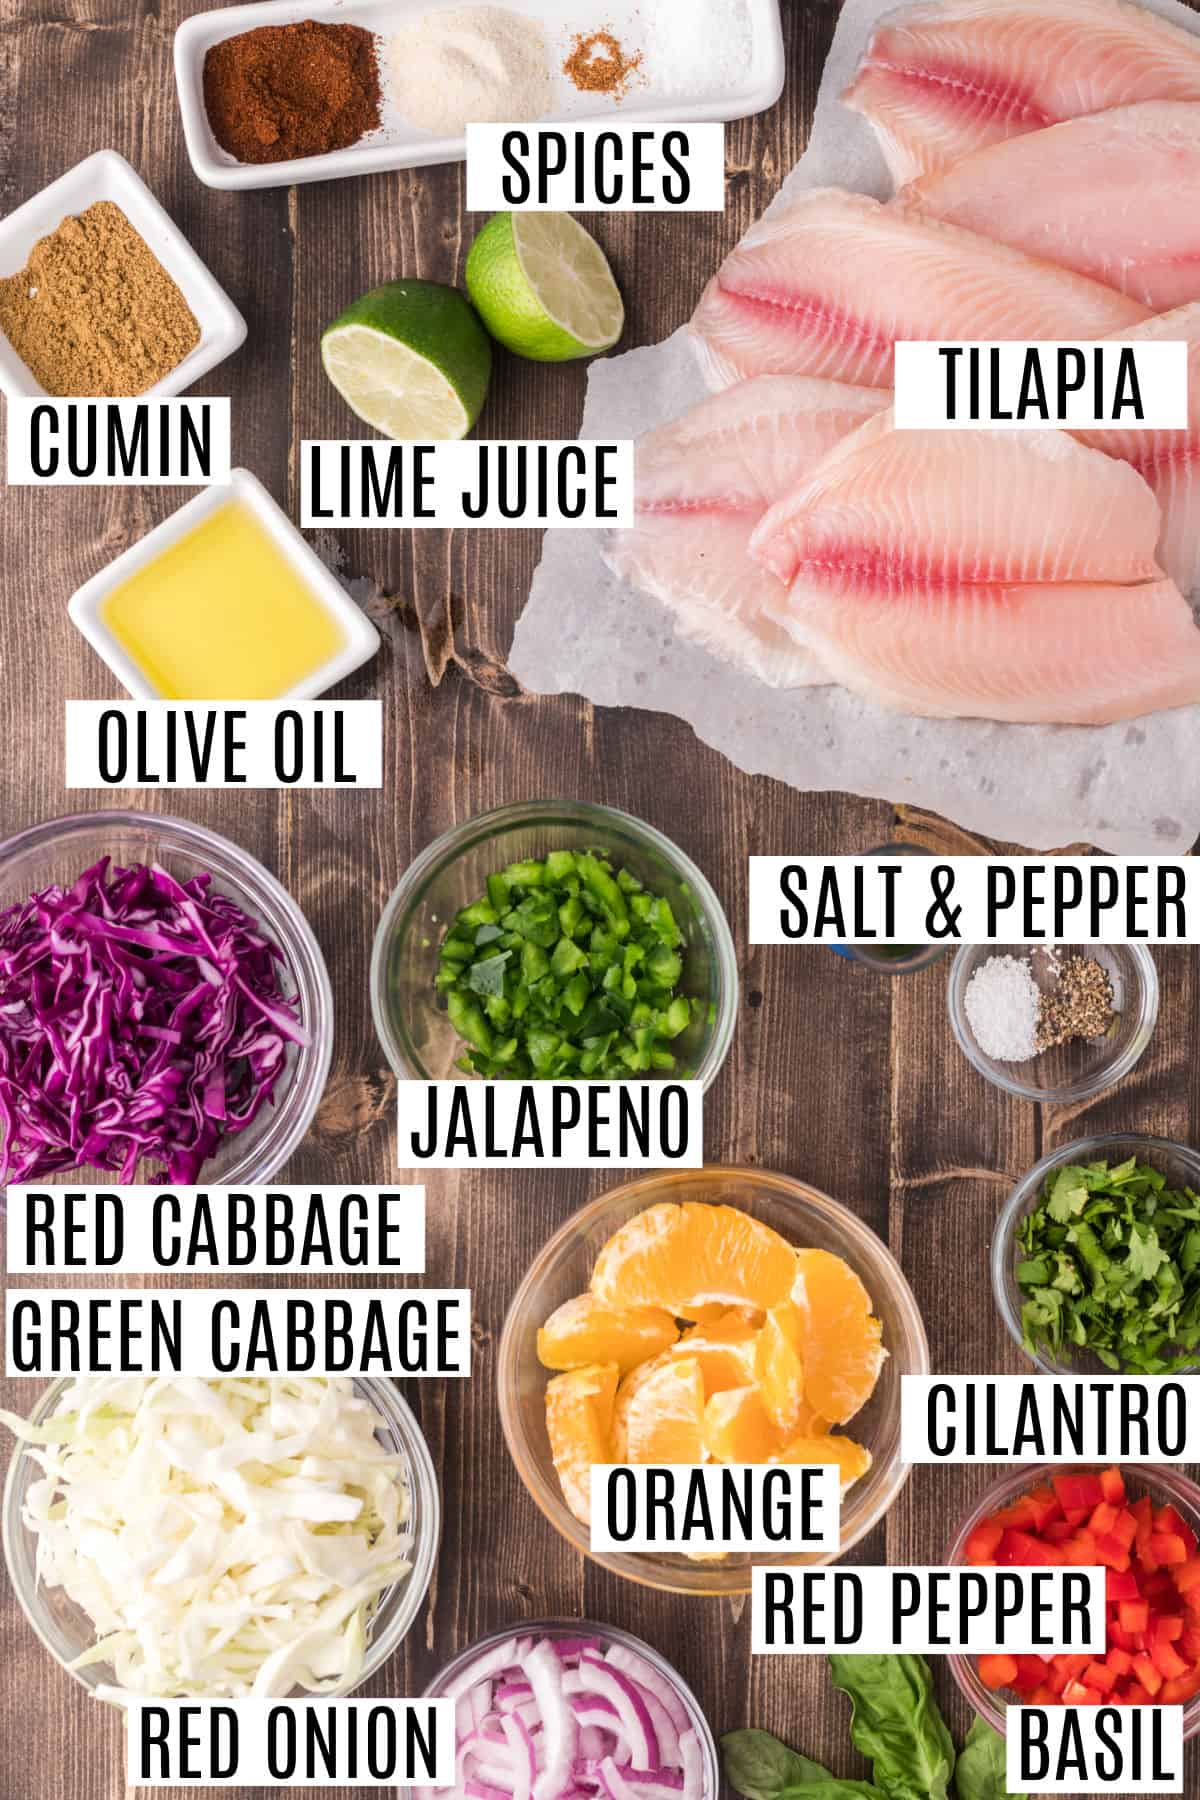 Ingredients needed for grilled tilapia and citrus slaw.